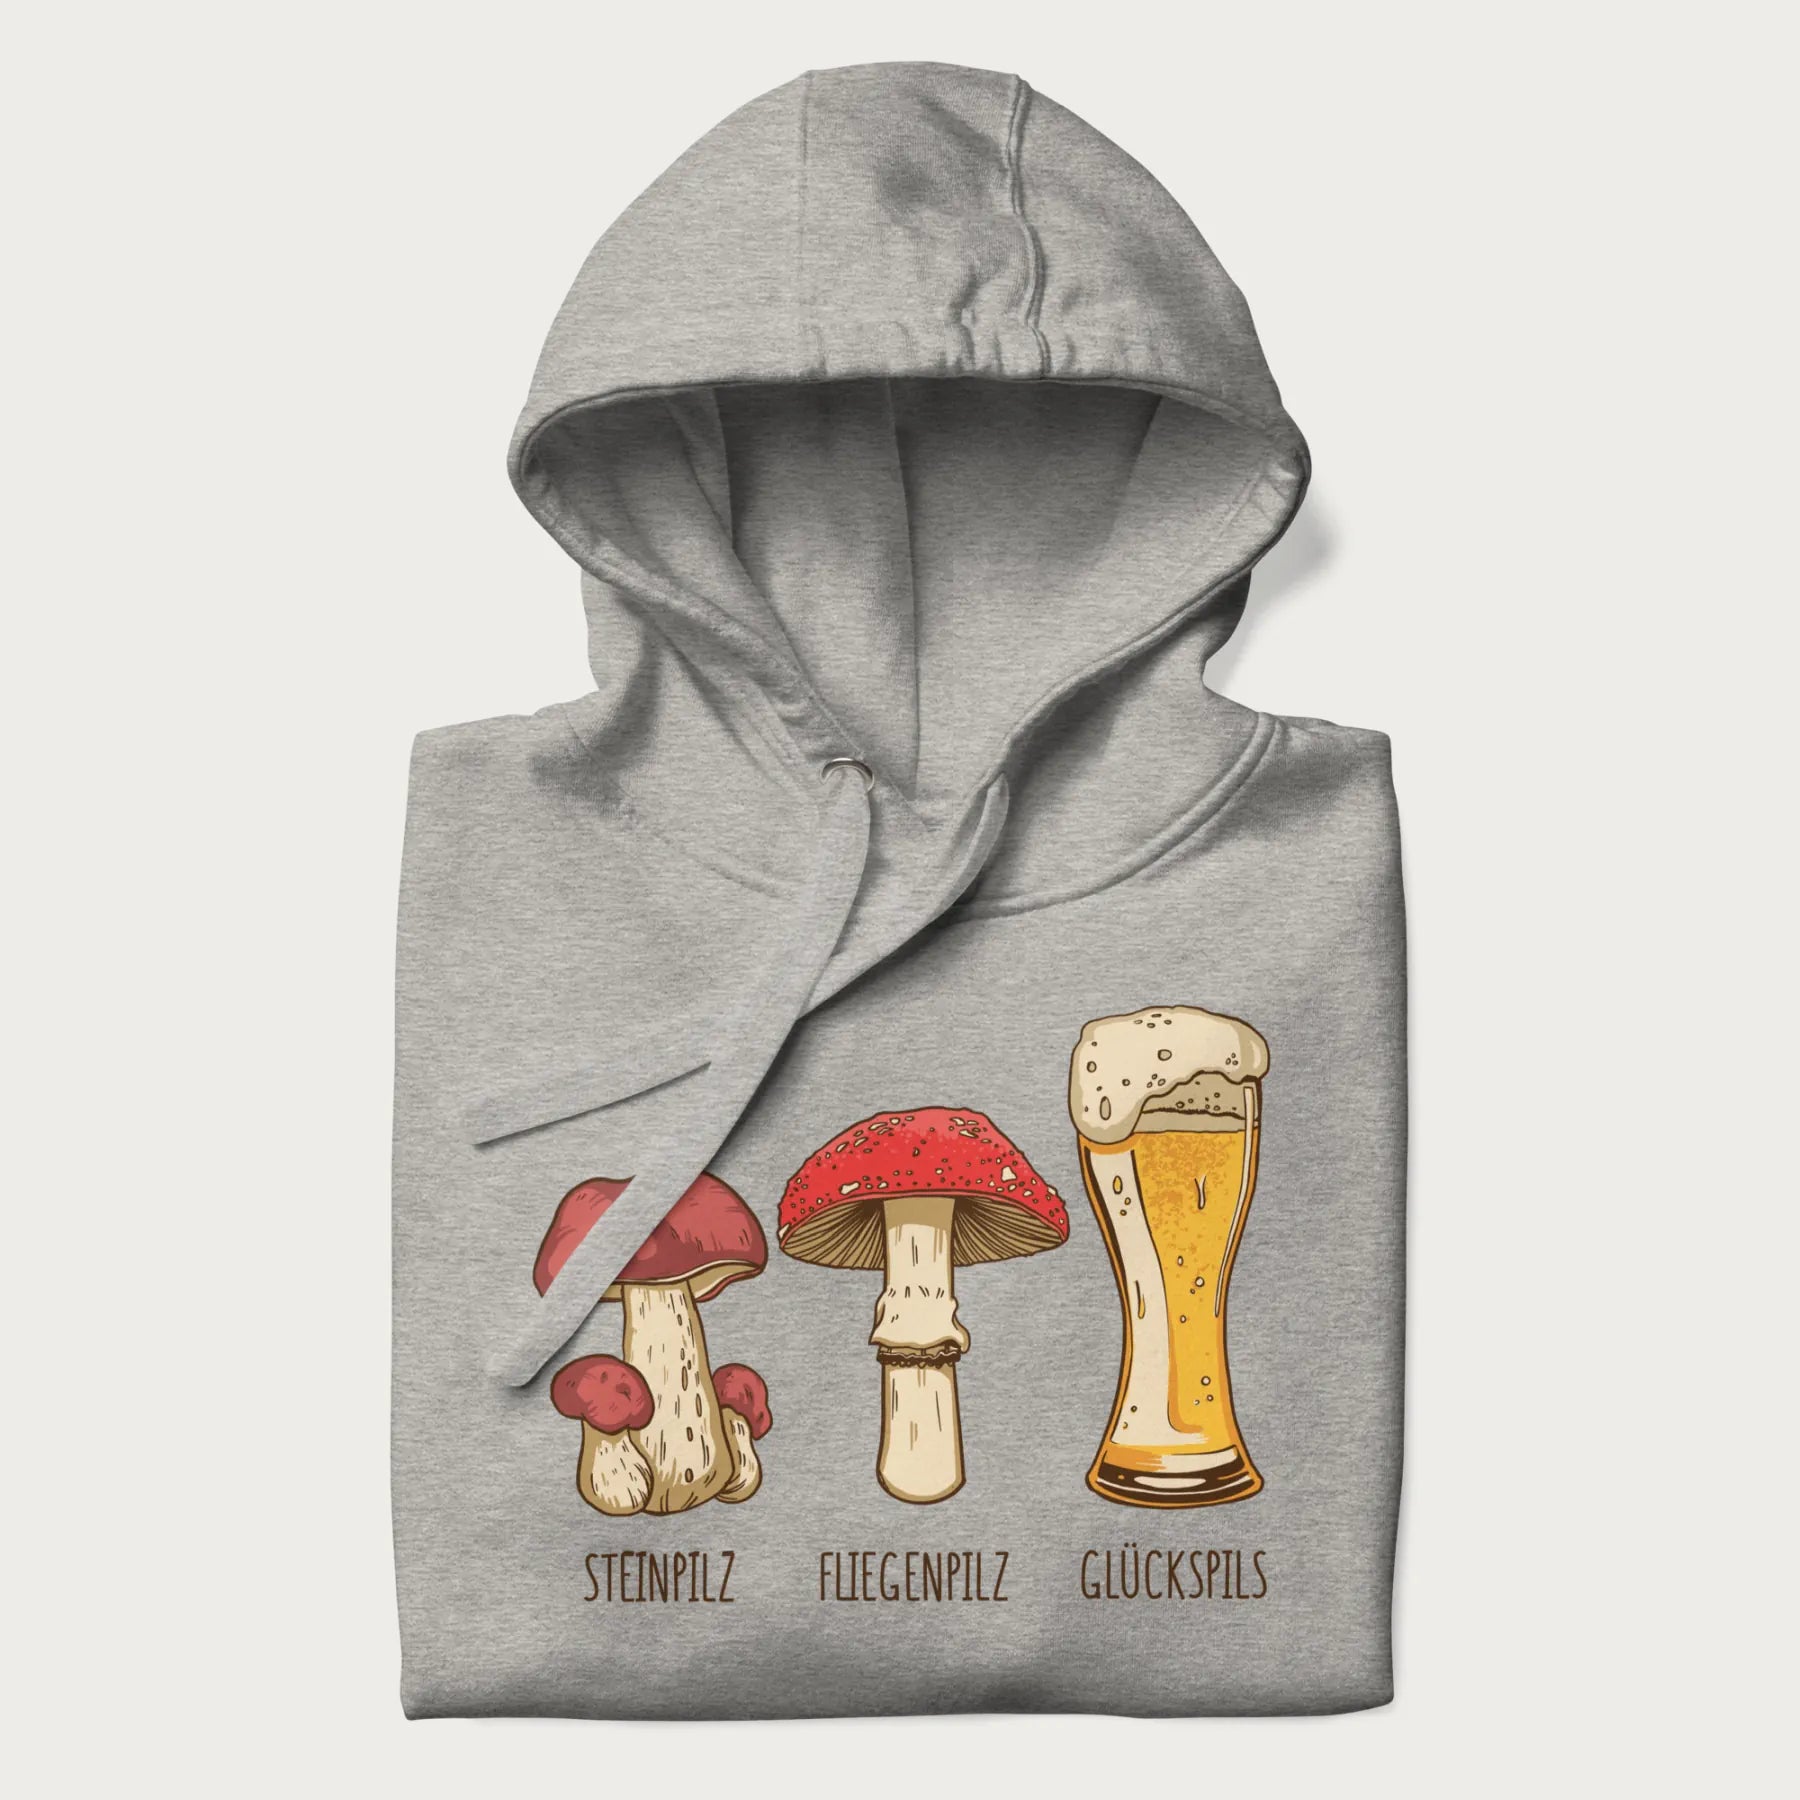 Folded light grey hoodie with illustrations of a Steinpilz, Fliegenpilz, and a beer glass labeled Glückspils.